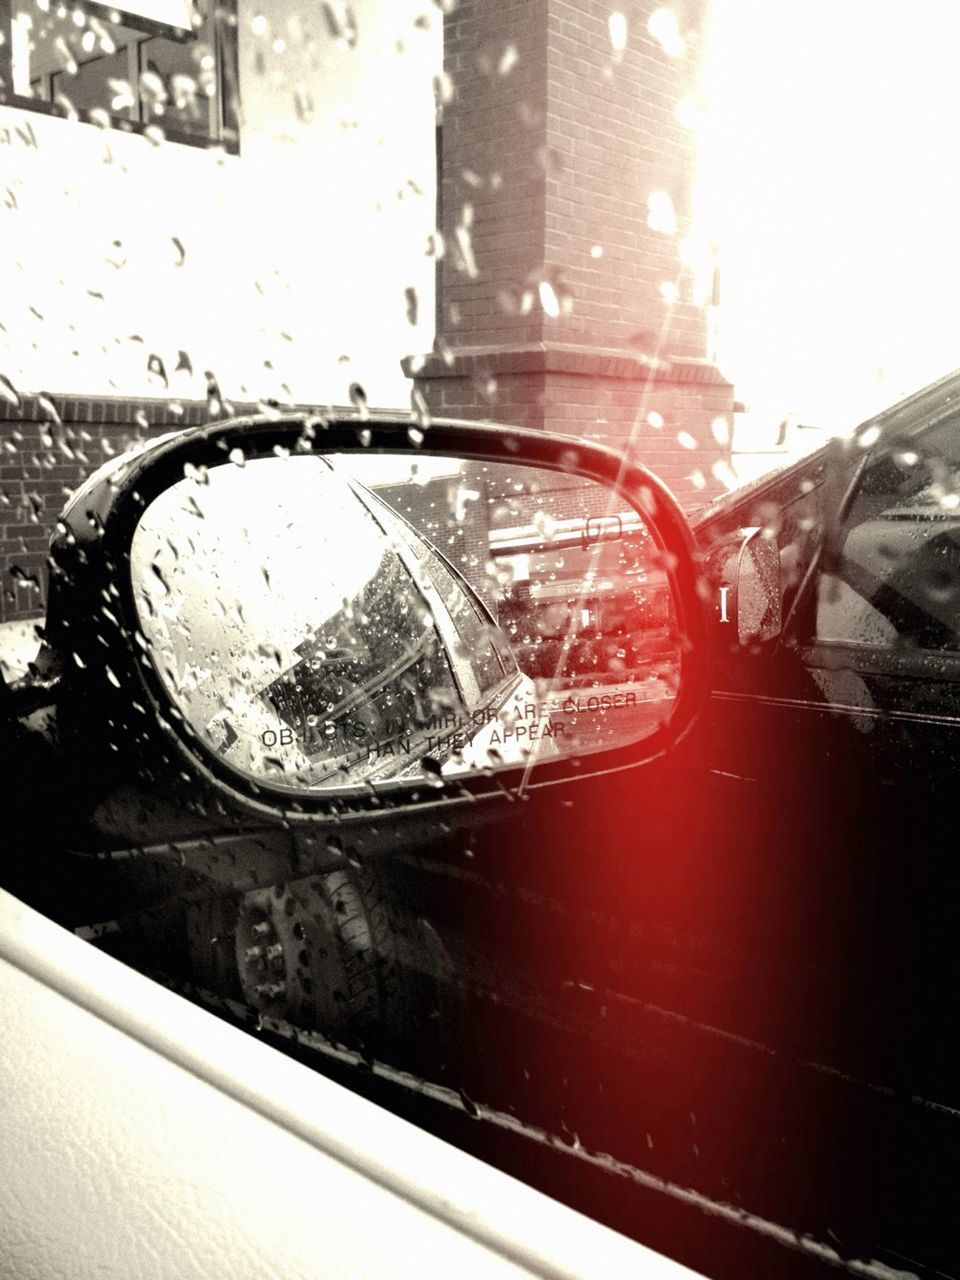 transportation, mode of transport, land vehicle, car, close-up, side-view mirror, glass - material, vehicle interior, window, transparent, car interior, part of, travel, reflection, headlight, wet, water, indoors, focus on foreground, drop